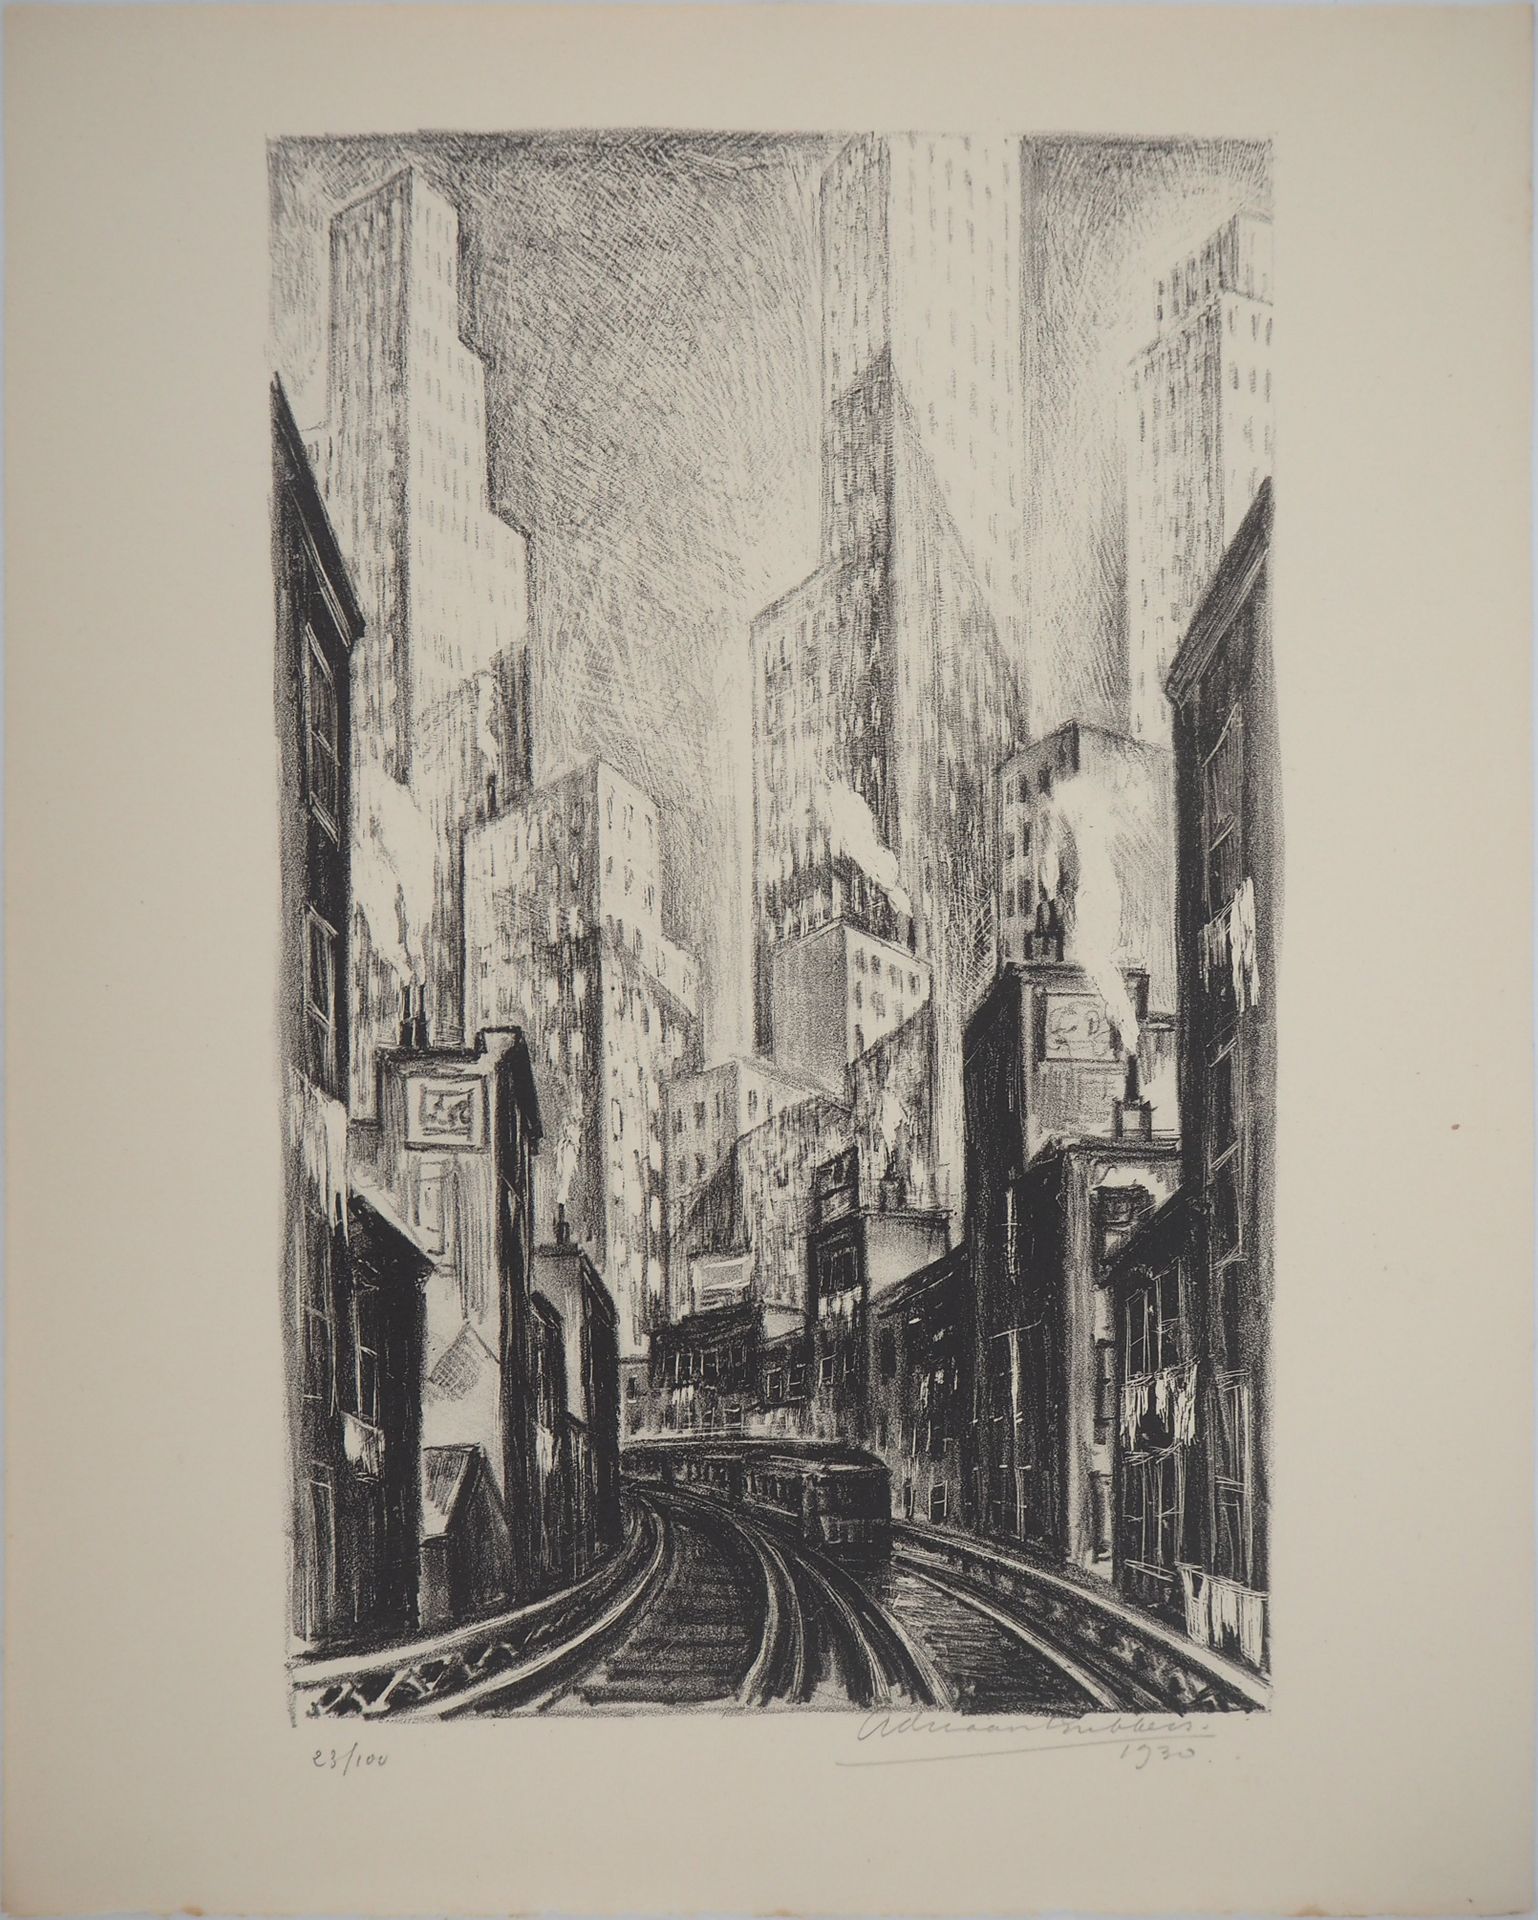 Adriaan Lubbers Adriaan Lubbers

New York City, The El at Chatham Square, 1930

&hellip;